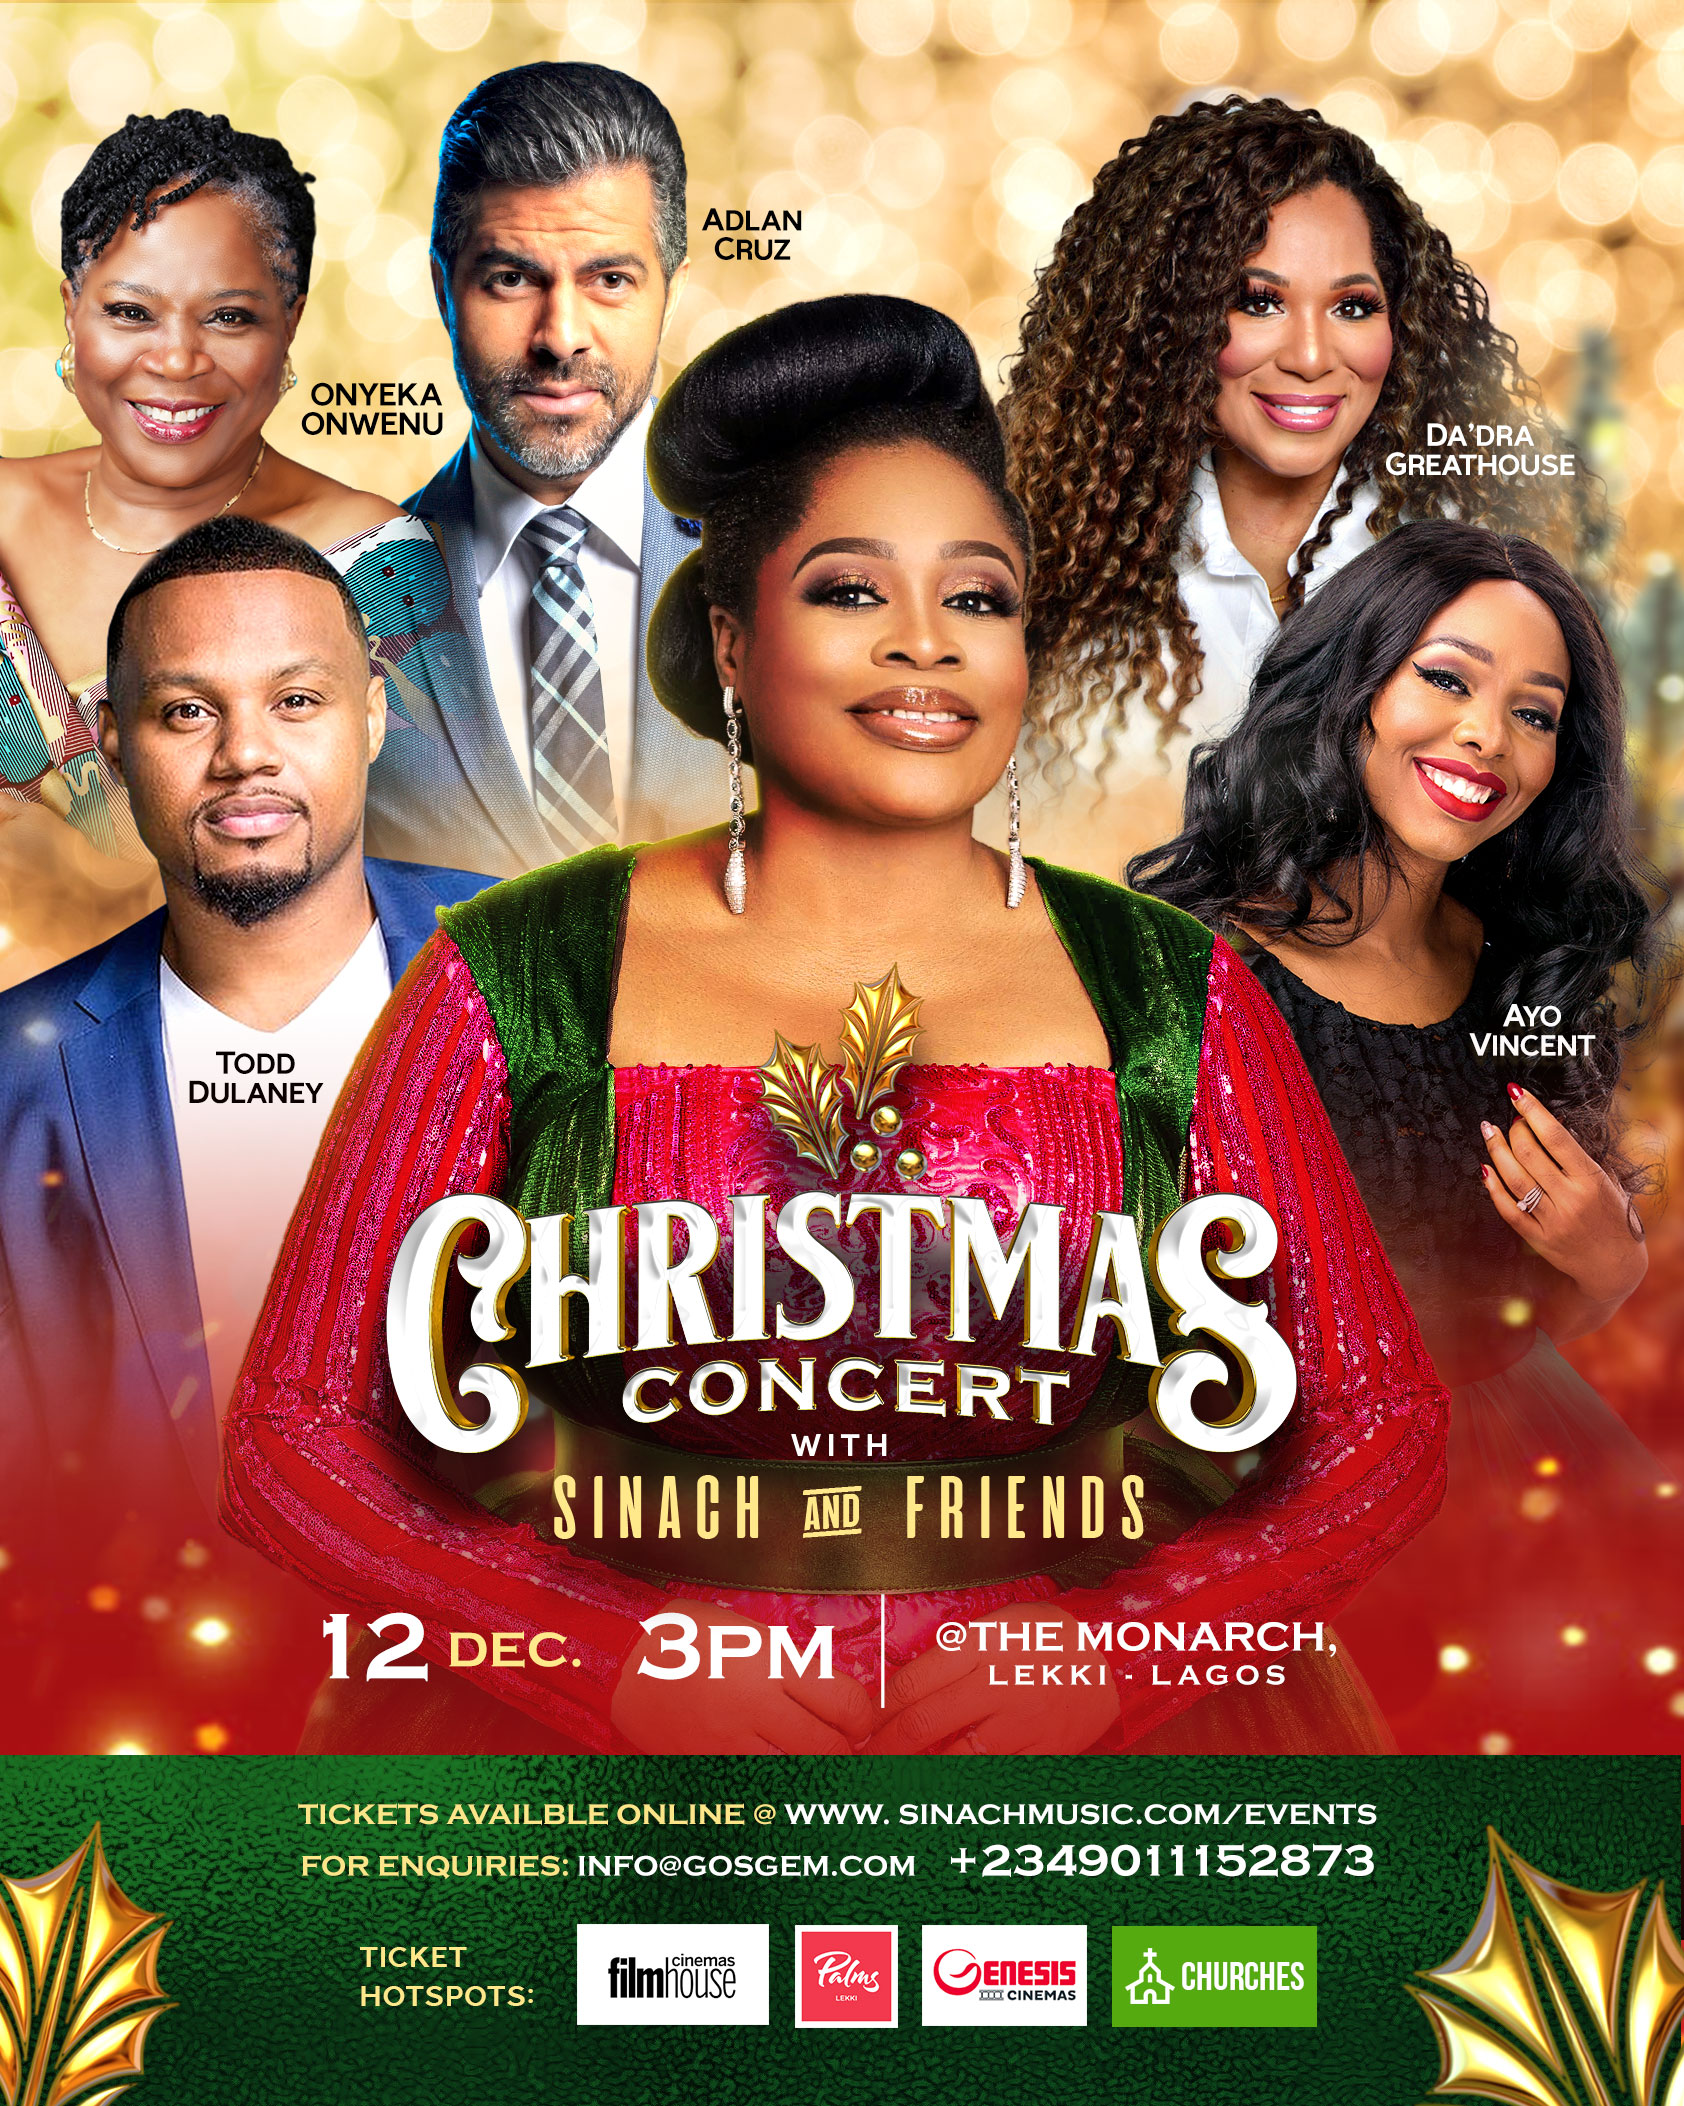 Todd Dulaney, Adlan Cruz, Others Join Sinach In Lagos For Christmas Concert